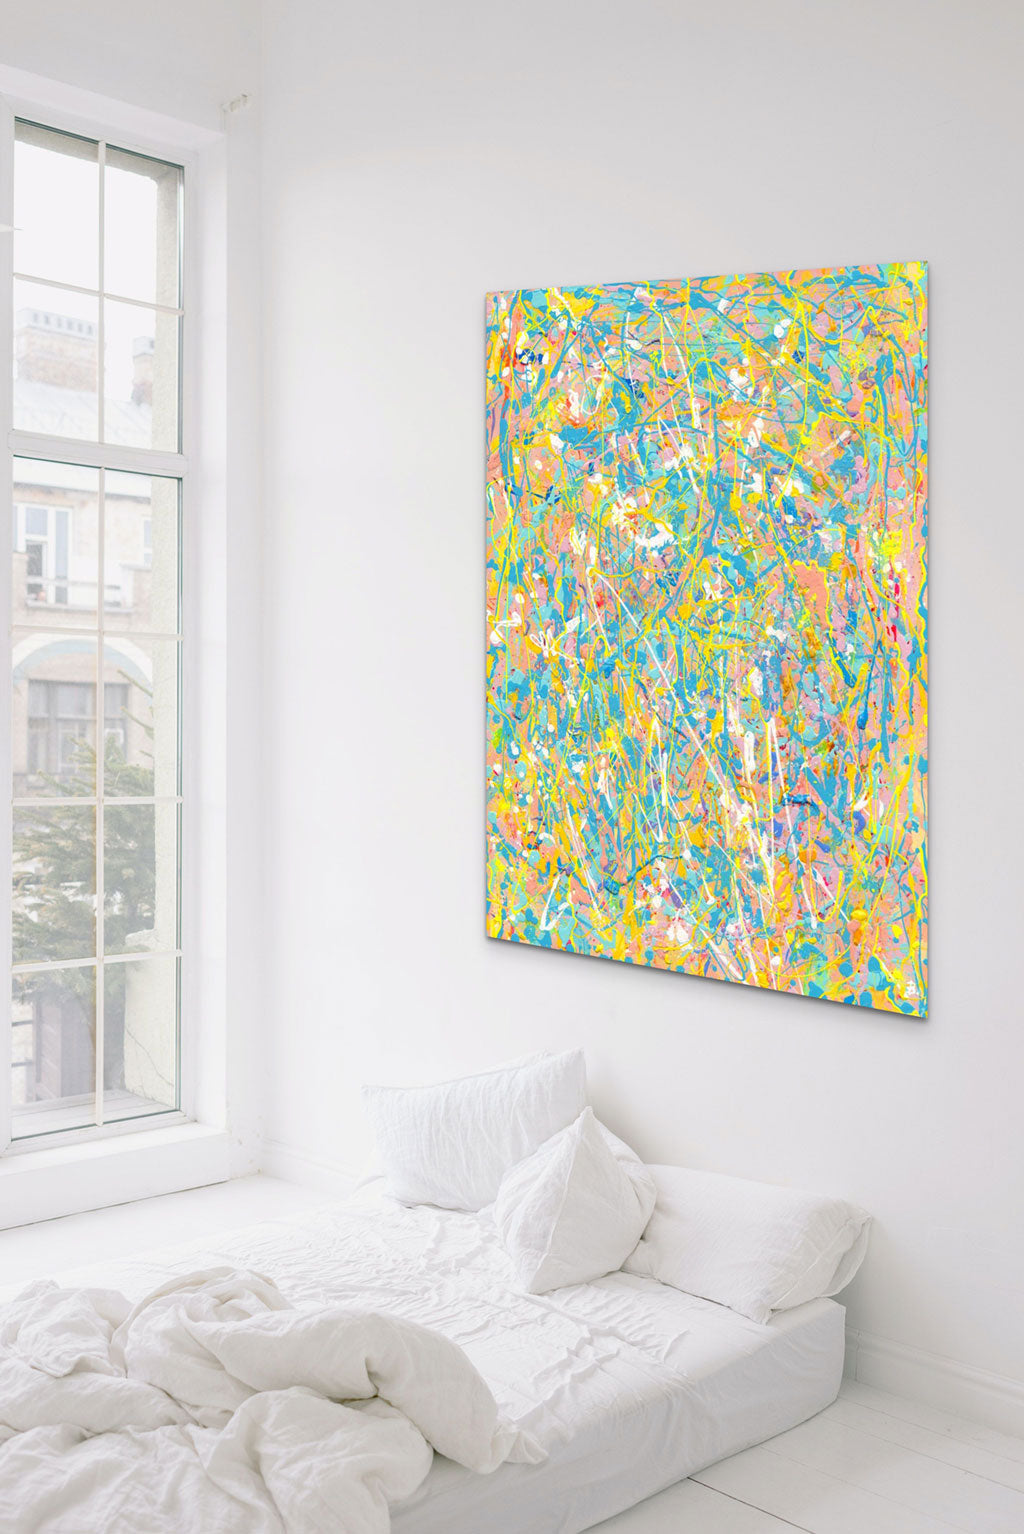 'Naked' original textured abstract  painting on canvas seen hanging in room with white decor above a bed. Artwork hand-painted by Bridget Bradley, Contemporary Abstract Artist Australia